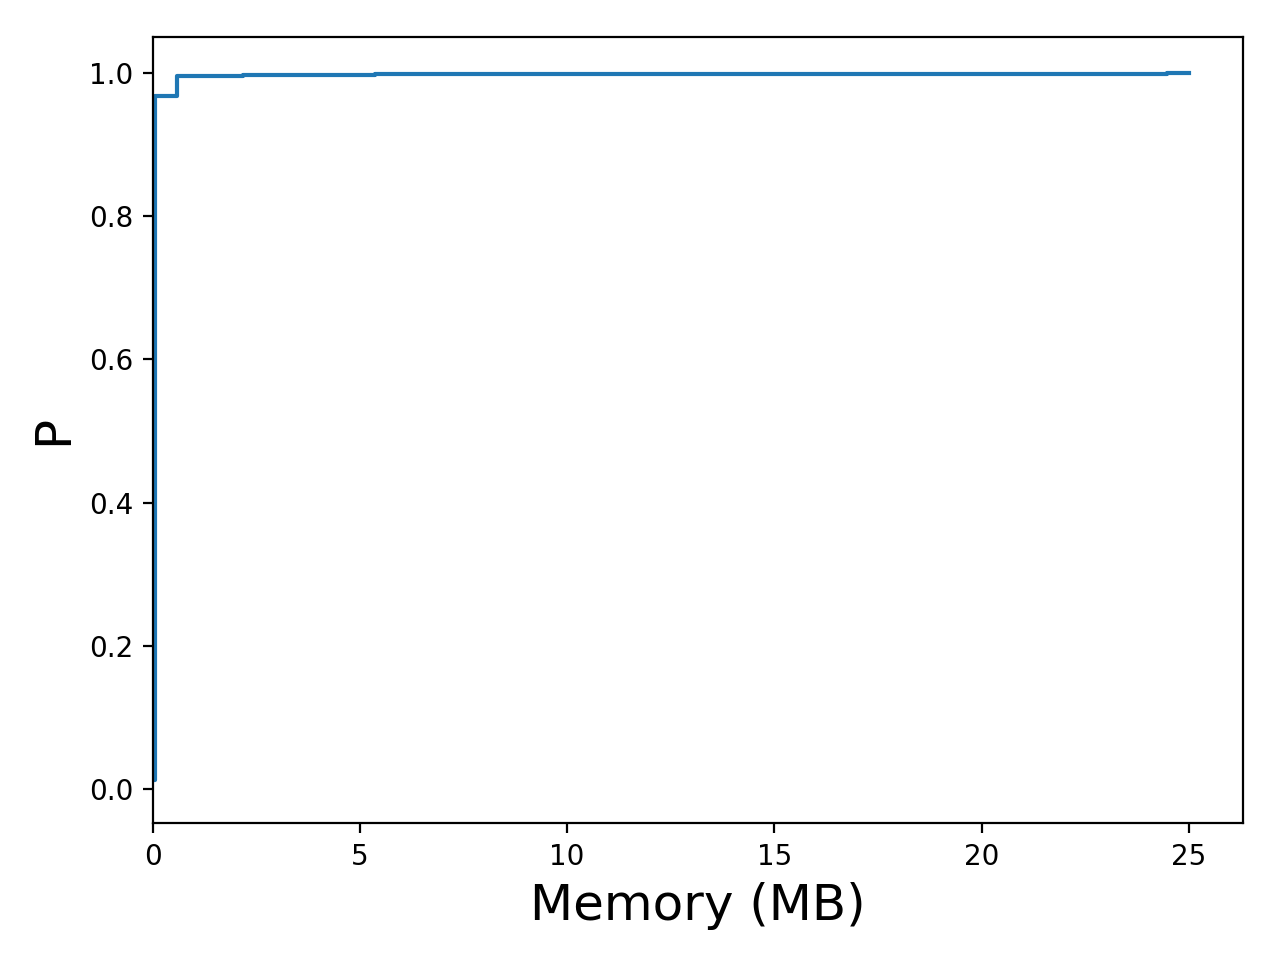 Task memory consumption graph for the alibaba2018 trace.